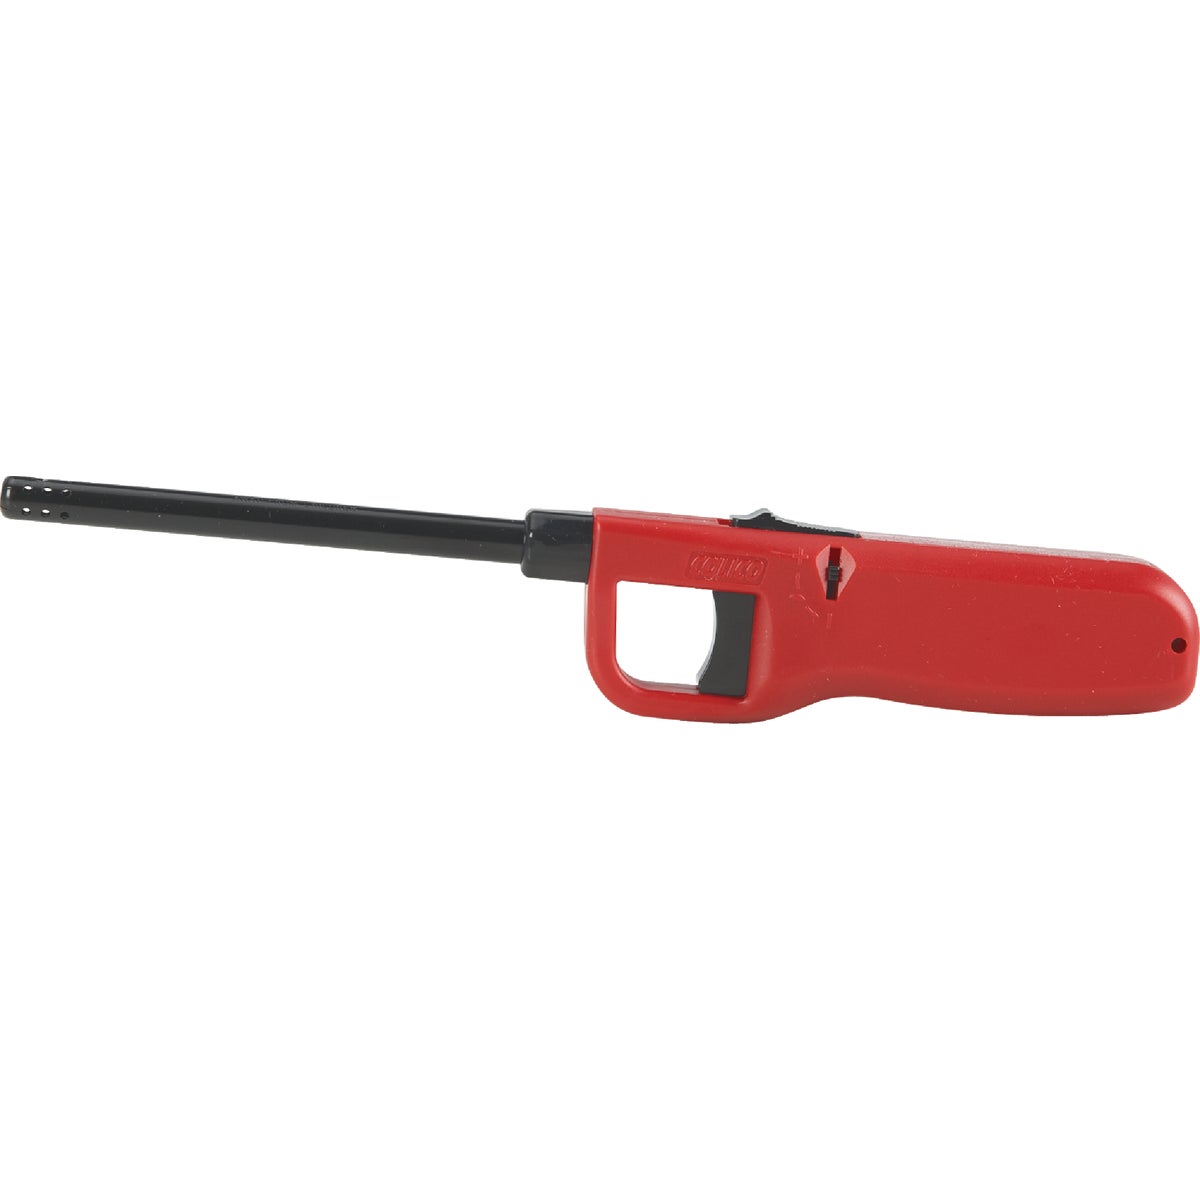 Item 813819, King utility lighter is great for starting grills, campfires, fireplaces, 